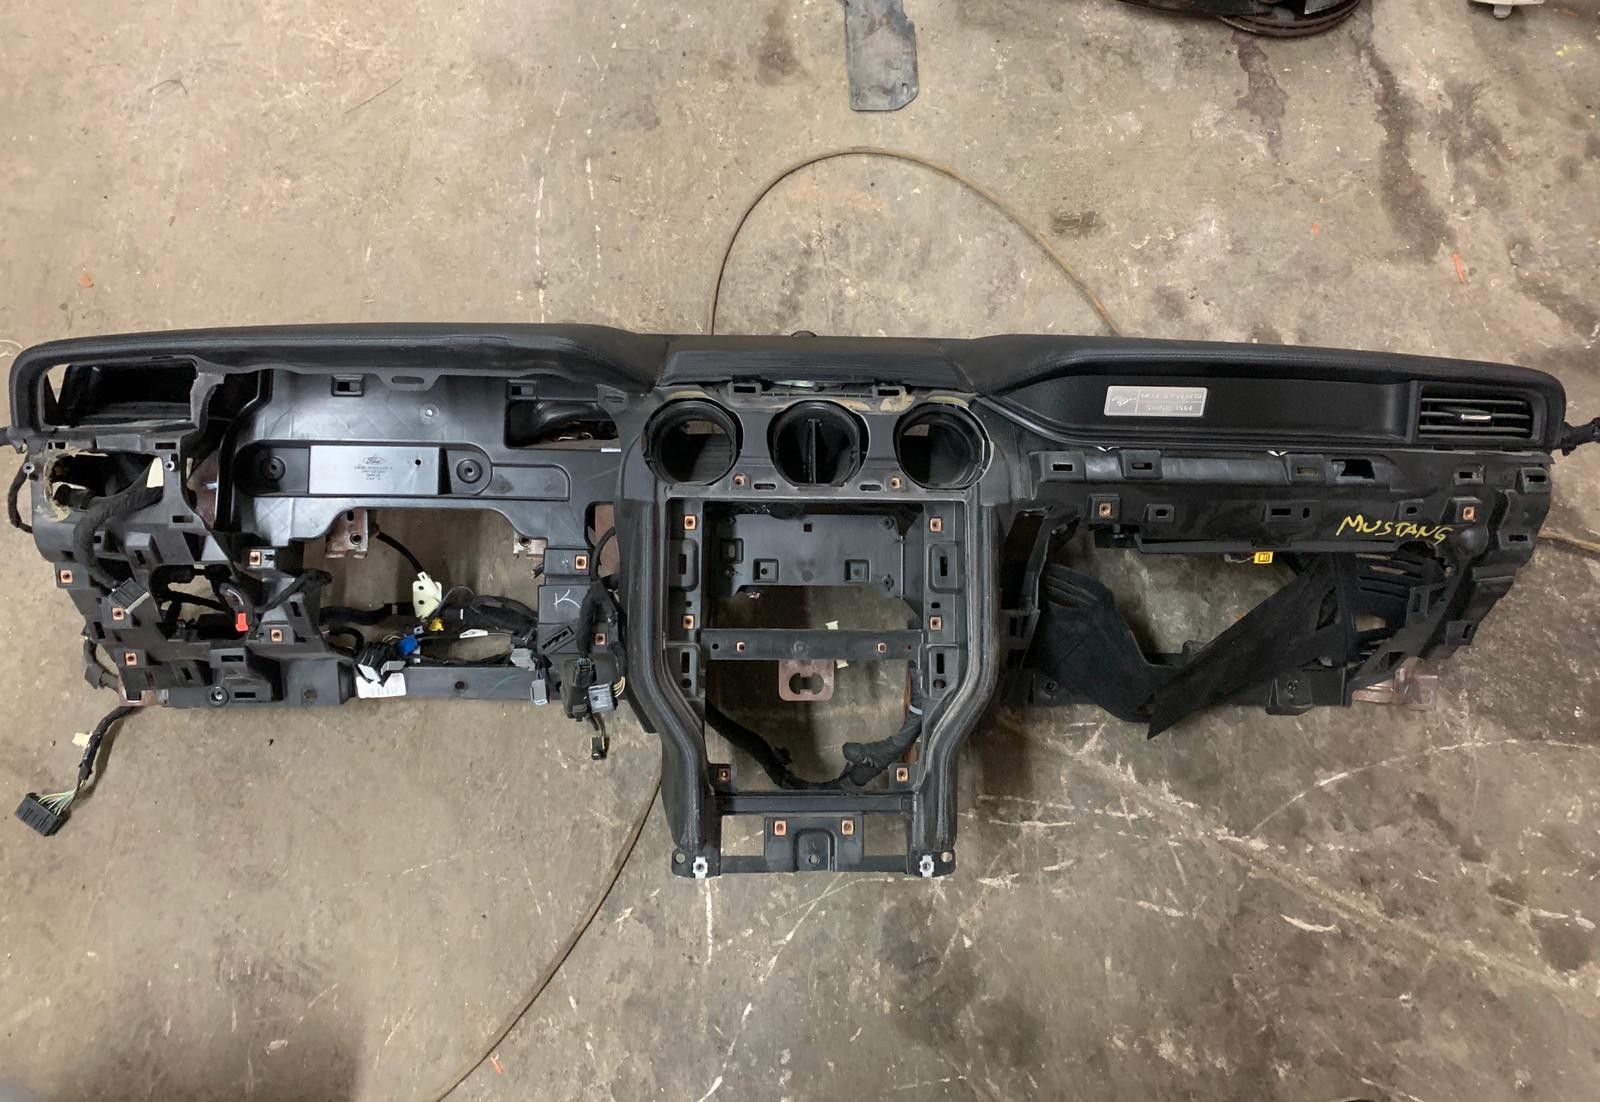 2017 ford mustang parts parting out dash board